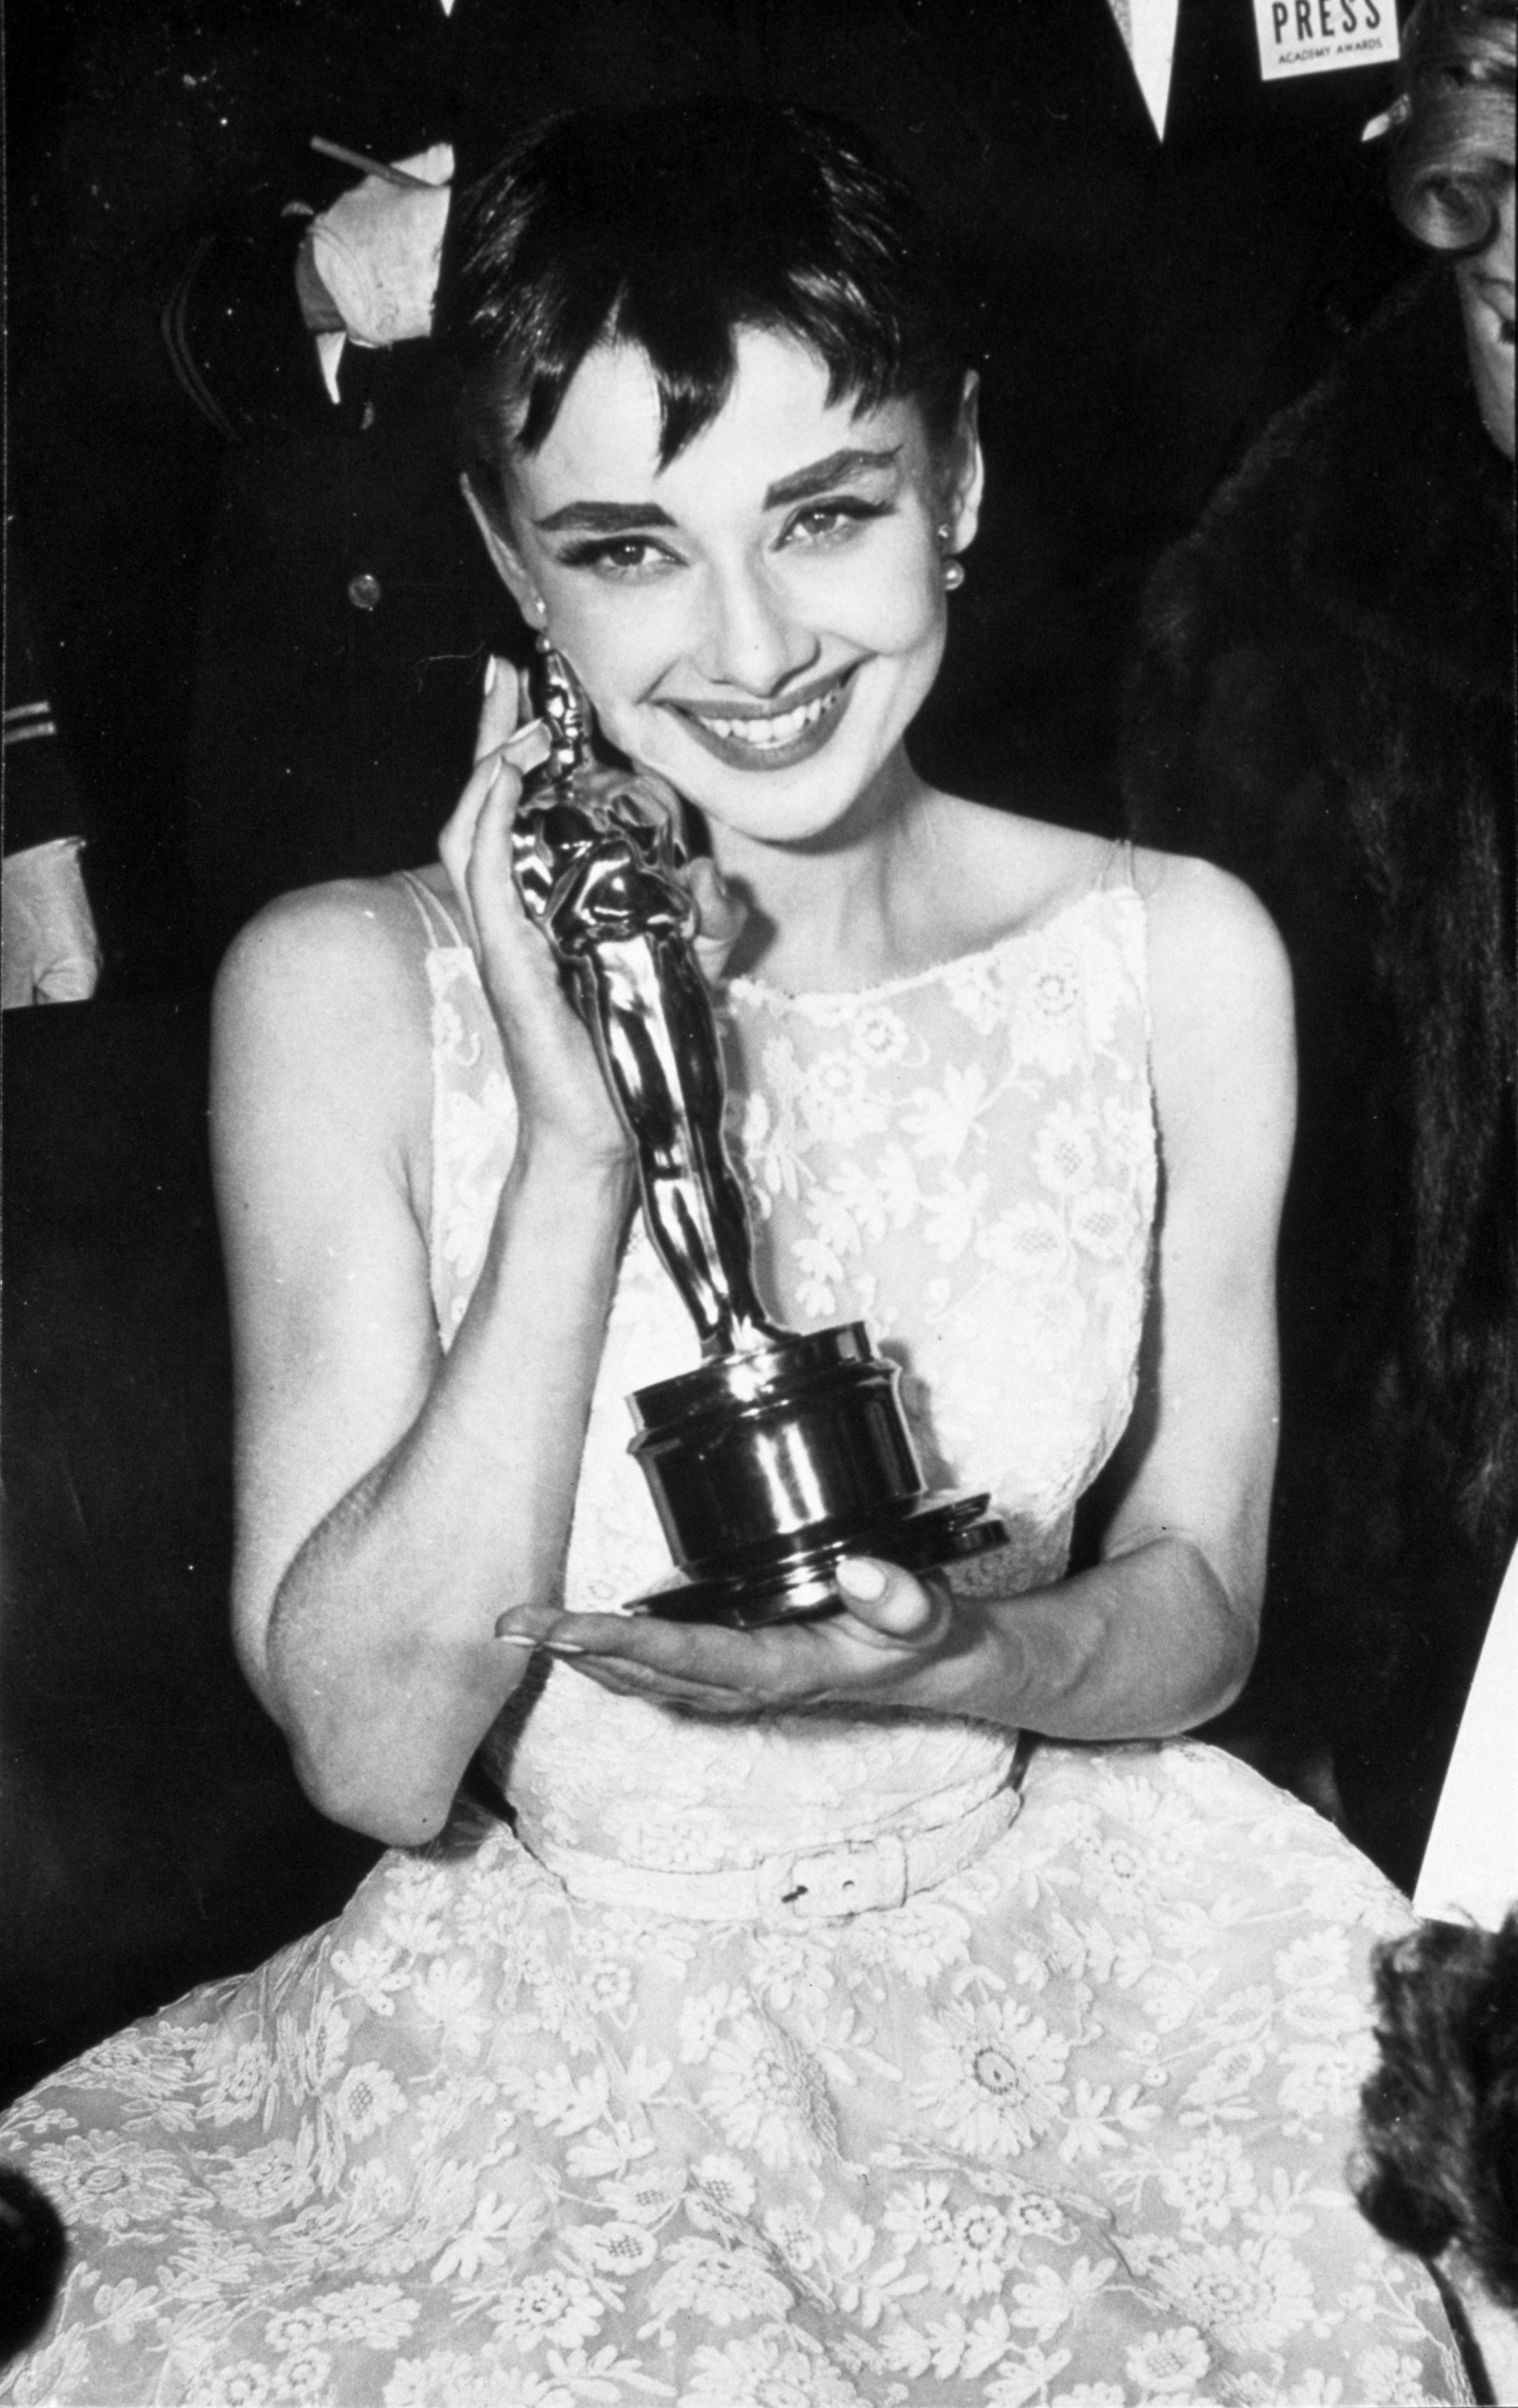 Audrey wearing a lacey white gown with a belt